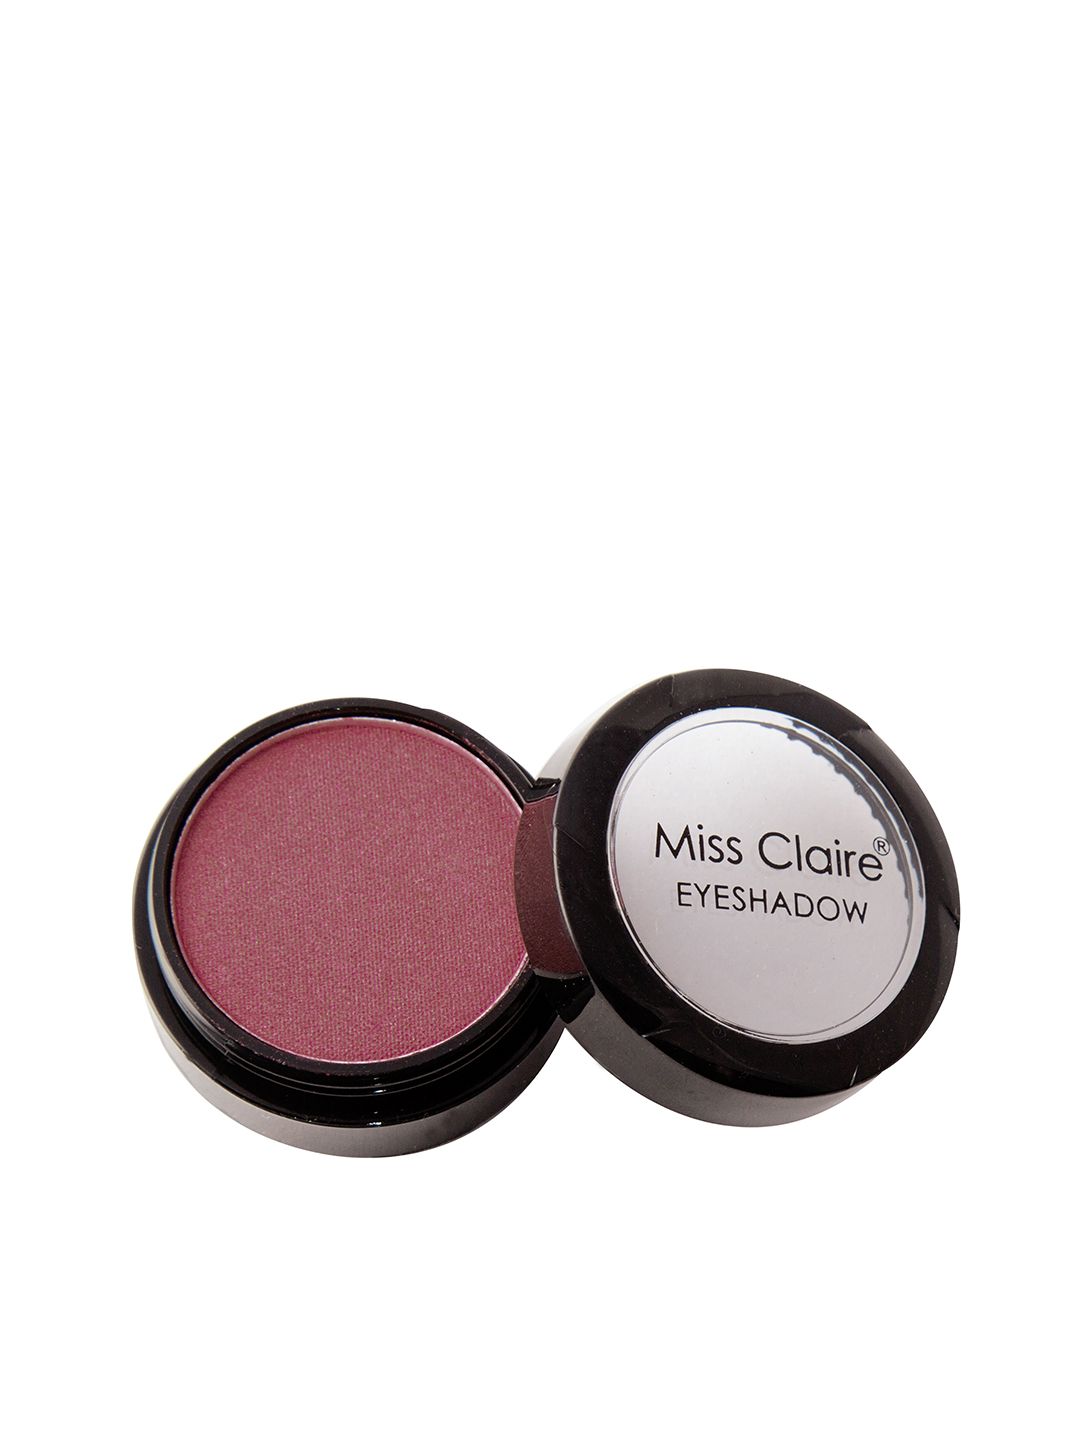 Miss Claire 0504 Single Eyeshadow 2 g Price in India